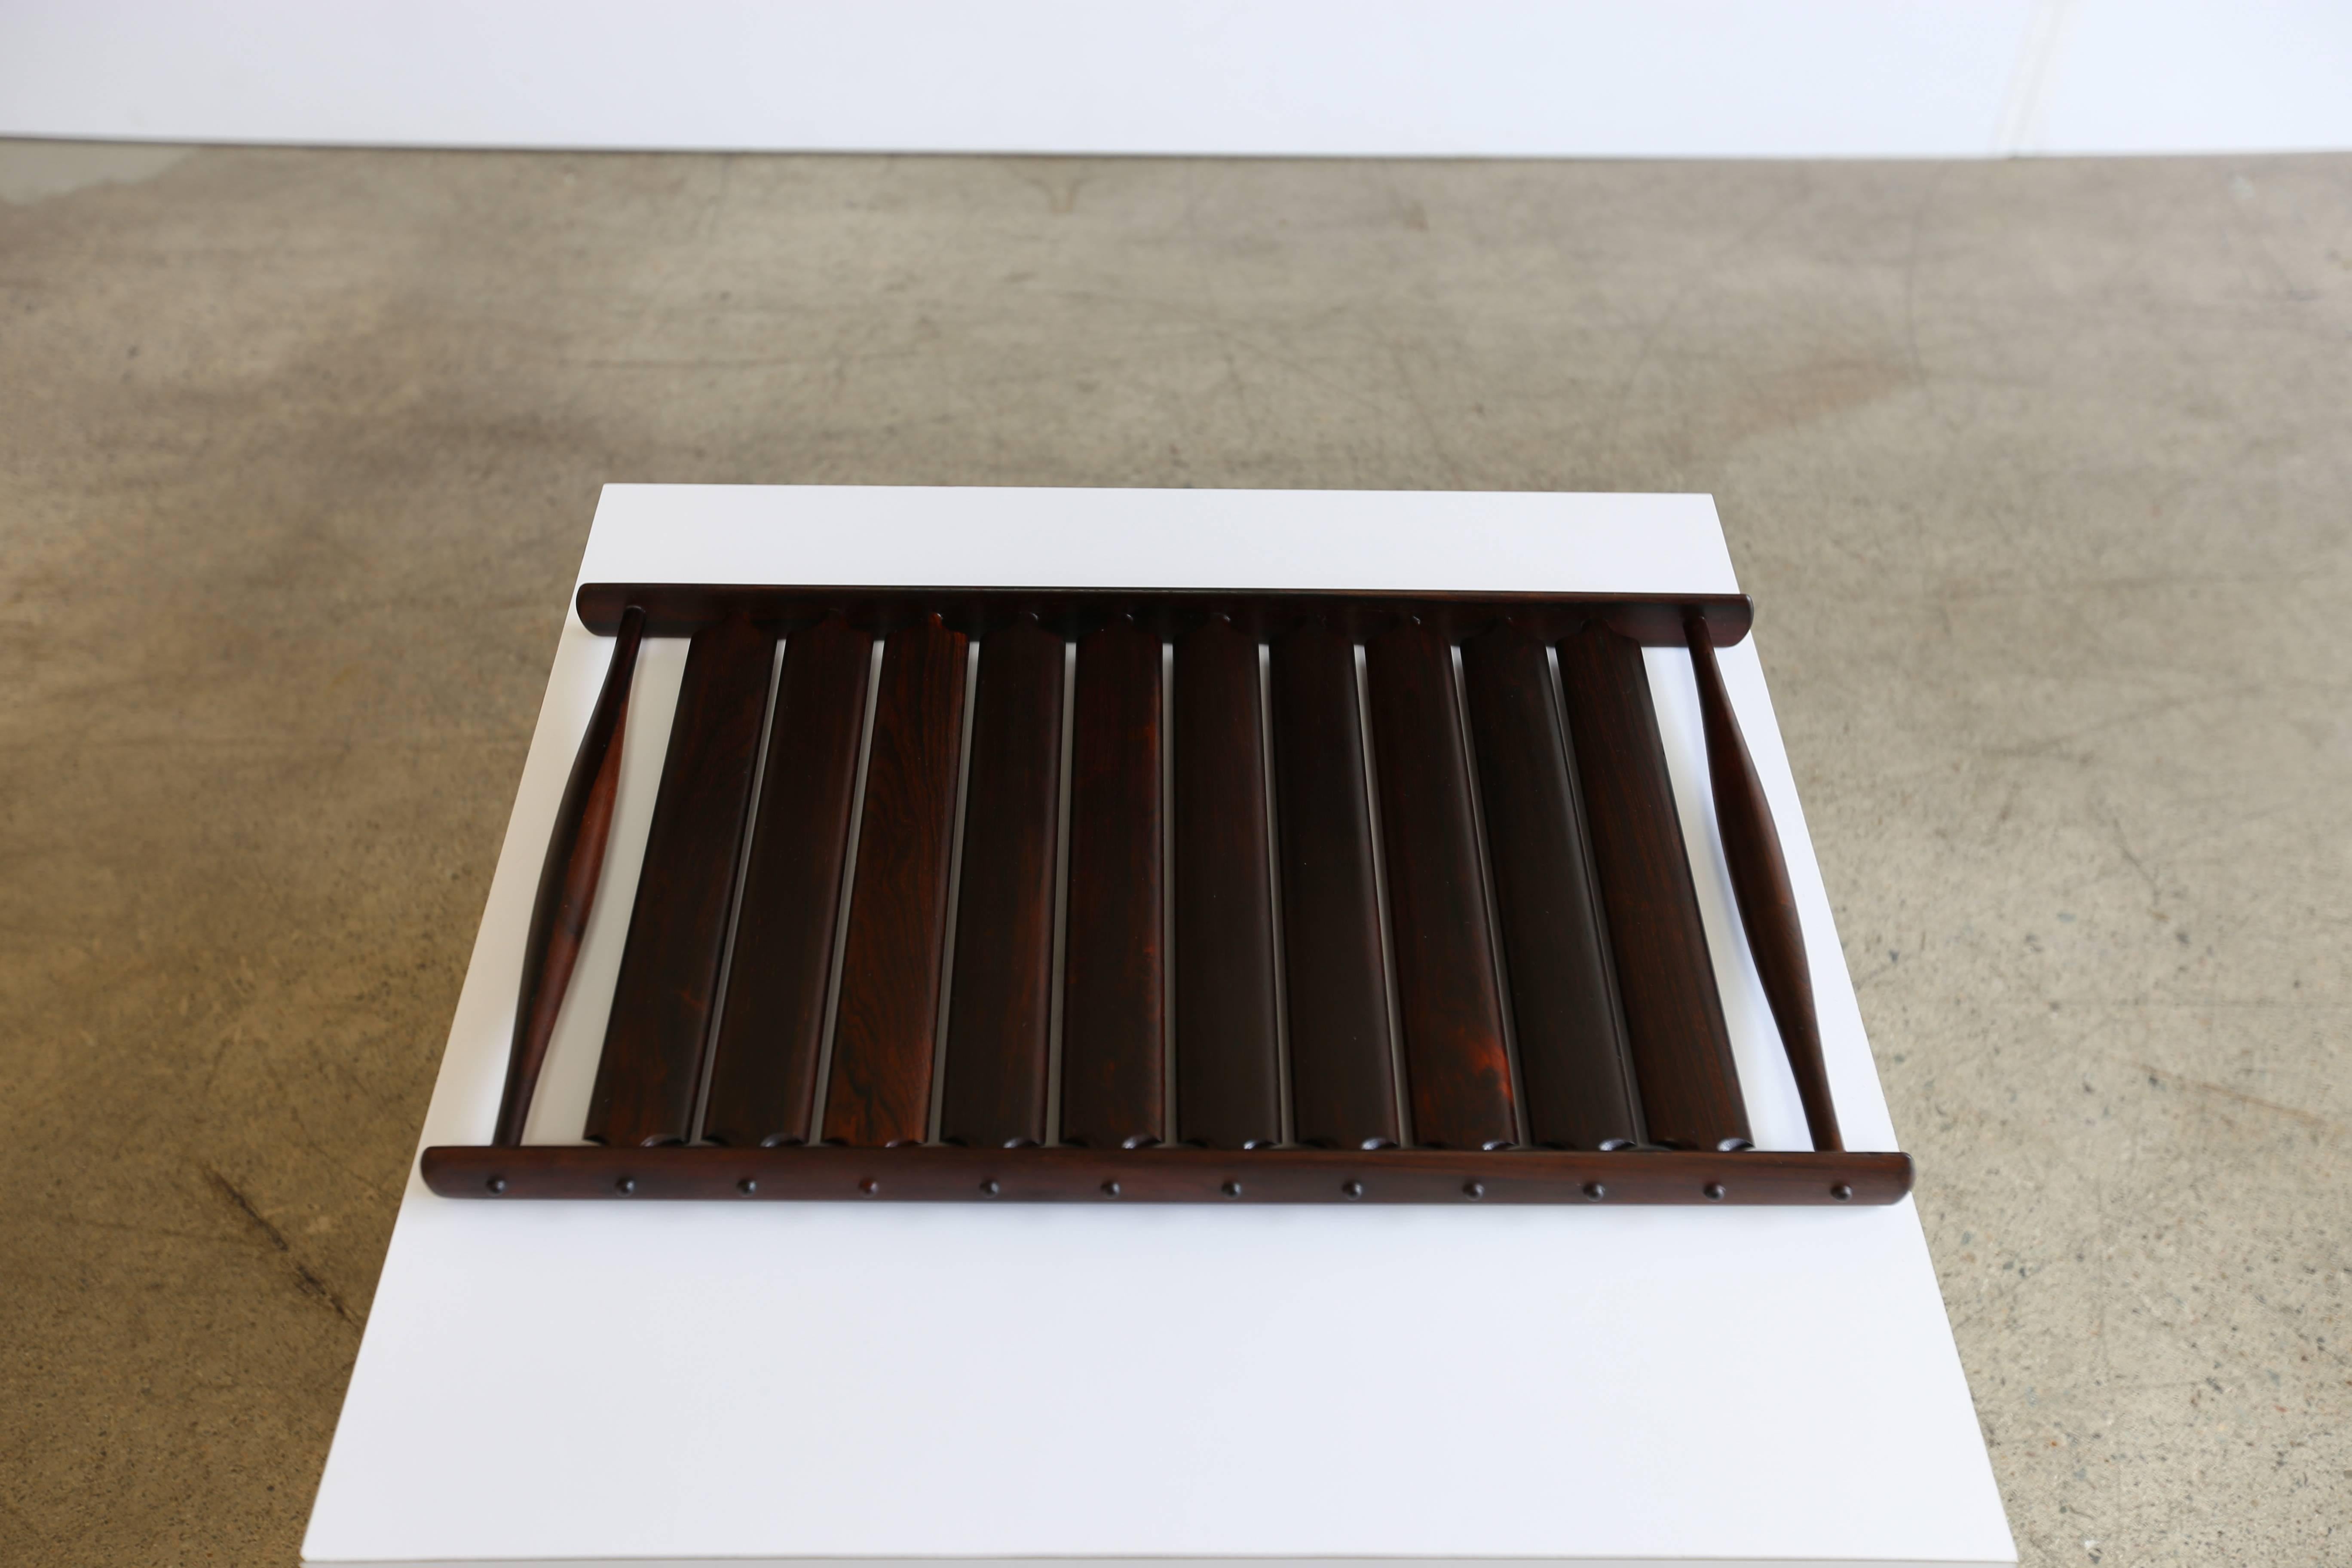 Danish Slatted Rosewood Tray by Jens Quistgaard for Dansk